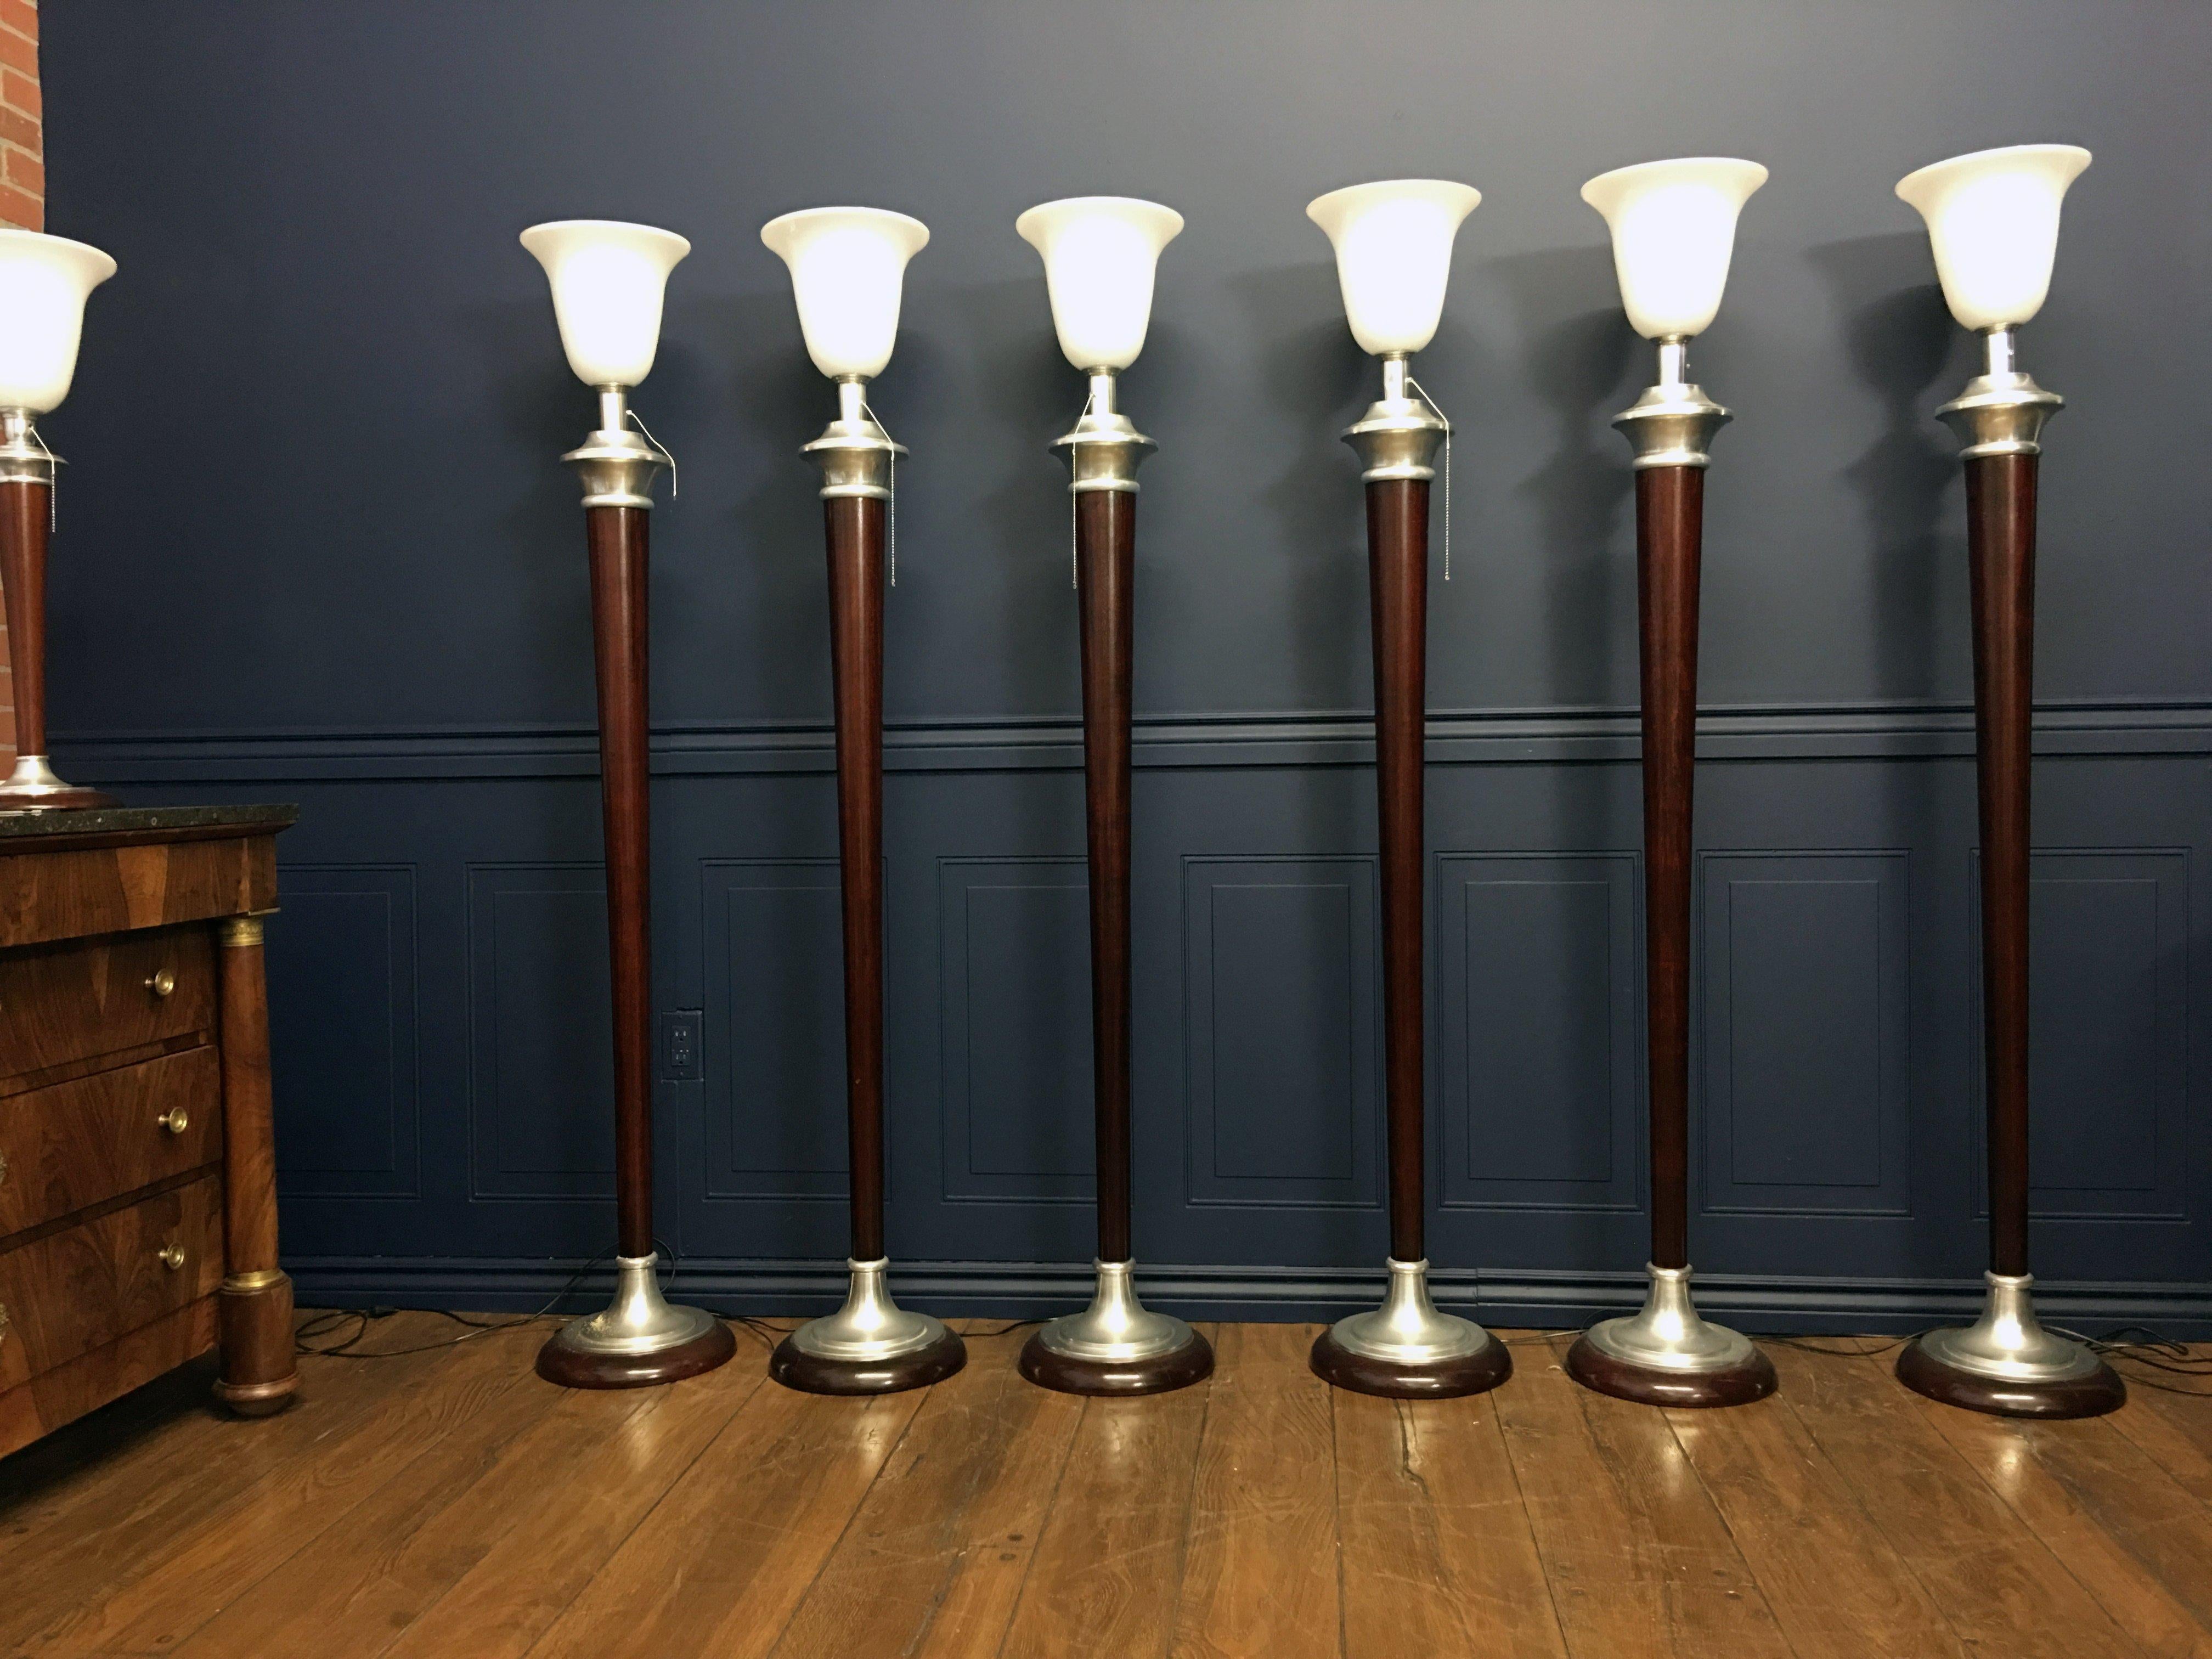 Set of six rare 1930s French Art Deco Mazda floor lamps with original Mazda Lamps Factory stamp. Made in France. They feature an opaque (Opaline) glass shade with chrome detailing and restored mahogany wood. All in impeccable